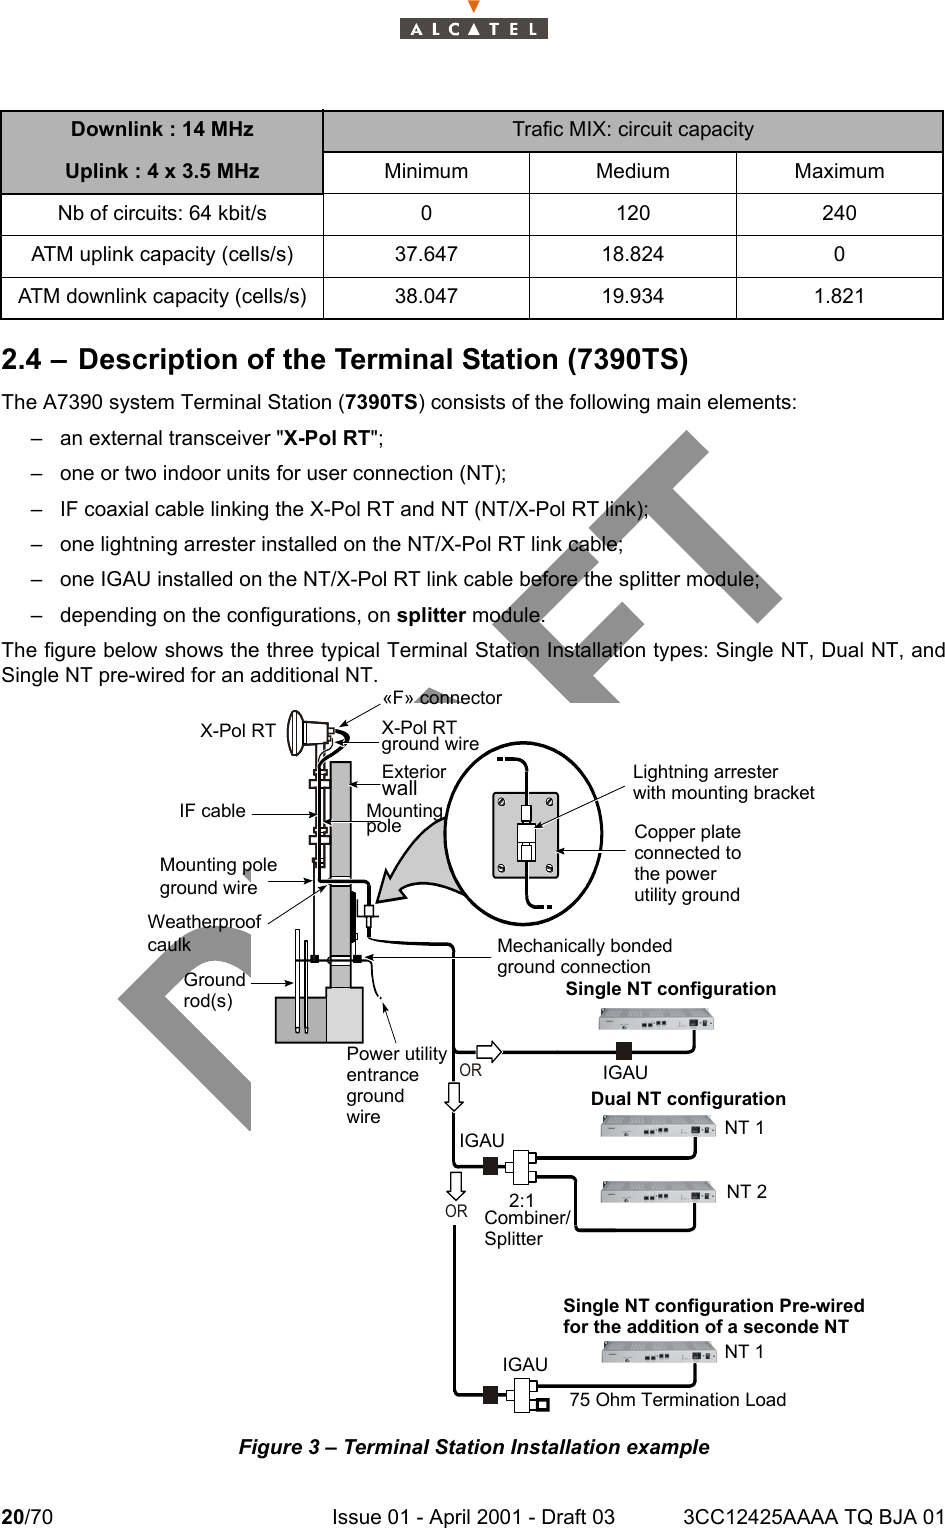 20/70 Issue 01 - April 2001 - Draft 03 3CC12425AAAA TQ BJA 01242.4 – Description of the Terminal Station (7390TS)The A7390 system Terminal Station (7390TS) consists of the following main elements:– an external transceiver &quot;X-Pol RT&quot;;– one or two indoor units for user connection (NT);– IF coaxial cable linking the X-Pol RT and NT (NT/X-Pol RT link);– one lightning arrester installed on the NT/X-Pol RT link cable;– one IGAU installed on the NT/X-Pol RT link cable before the splitter module;– depending on the configurations, on splitter module.The figure below shows the three typical Terminal Station Installation types: Single NT, Dual NT, andSingle NT pre-wired for an additional NT.Figure 3 – Terminal Station Installation exampleDownlink : 14 MHz Trafic MIX: circuit capacityUplink : 4 x 3.5 MHz Minimum Medium MaximumNb of circuits: 64 kbit/s 0 120 240ATM uplink capacity (cells/s) 37.647 18.824 0ATM downlink capacity (cells/s) 38.047 19.934 1.821ORORX-Pol RTX-Pol RT ground wire«F» connectorExteriorwallIF cable MountingpoleMounting poleground wireWeatherproofcaulkGroundrod(s)IGAUPower utilityentrancegroundwireLightning arresterwith mounting bracketCopper plateconnected tothe powerutility groundMechanically bondedground connectionSingle NT configurationDual NT configurationNT 1NT 22:1Combiner/SplitterSingle NT configuration Pre-wiredfor the addition of a seconde NTNT 175 Ohm Termination LoadIGAUIGAU